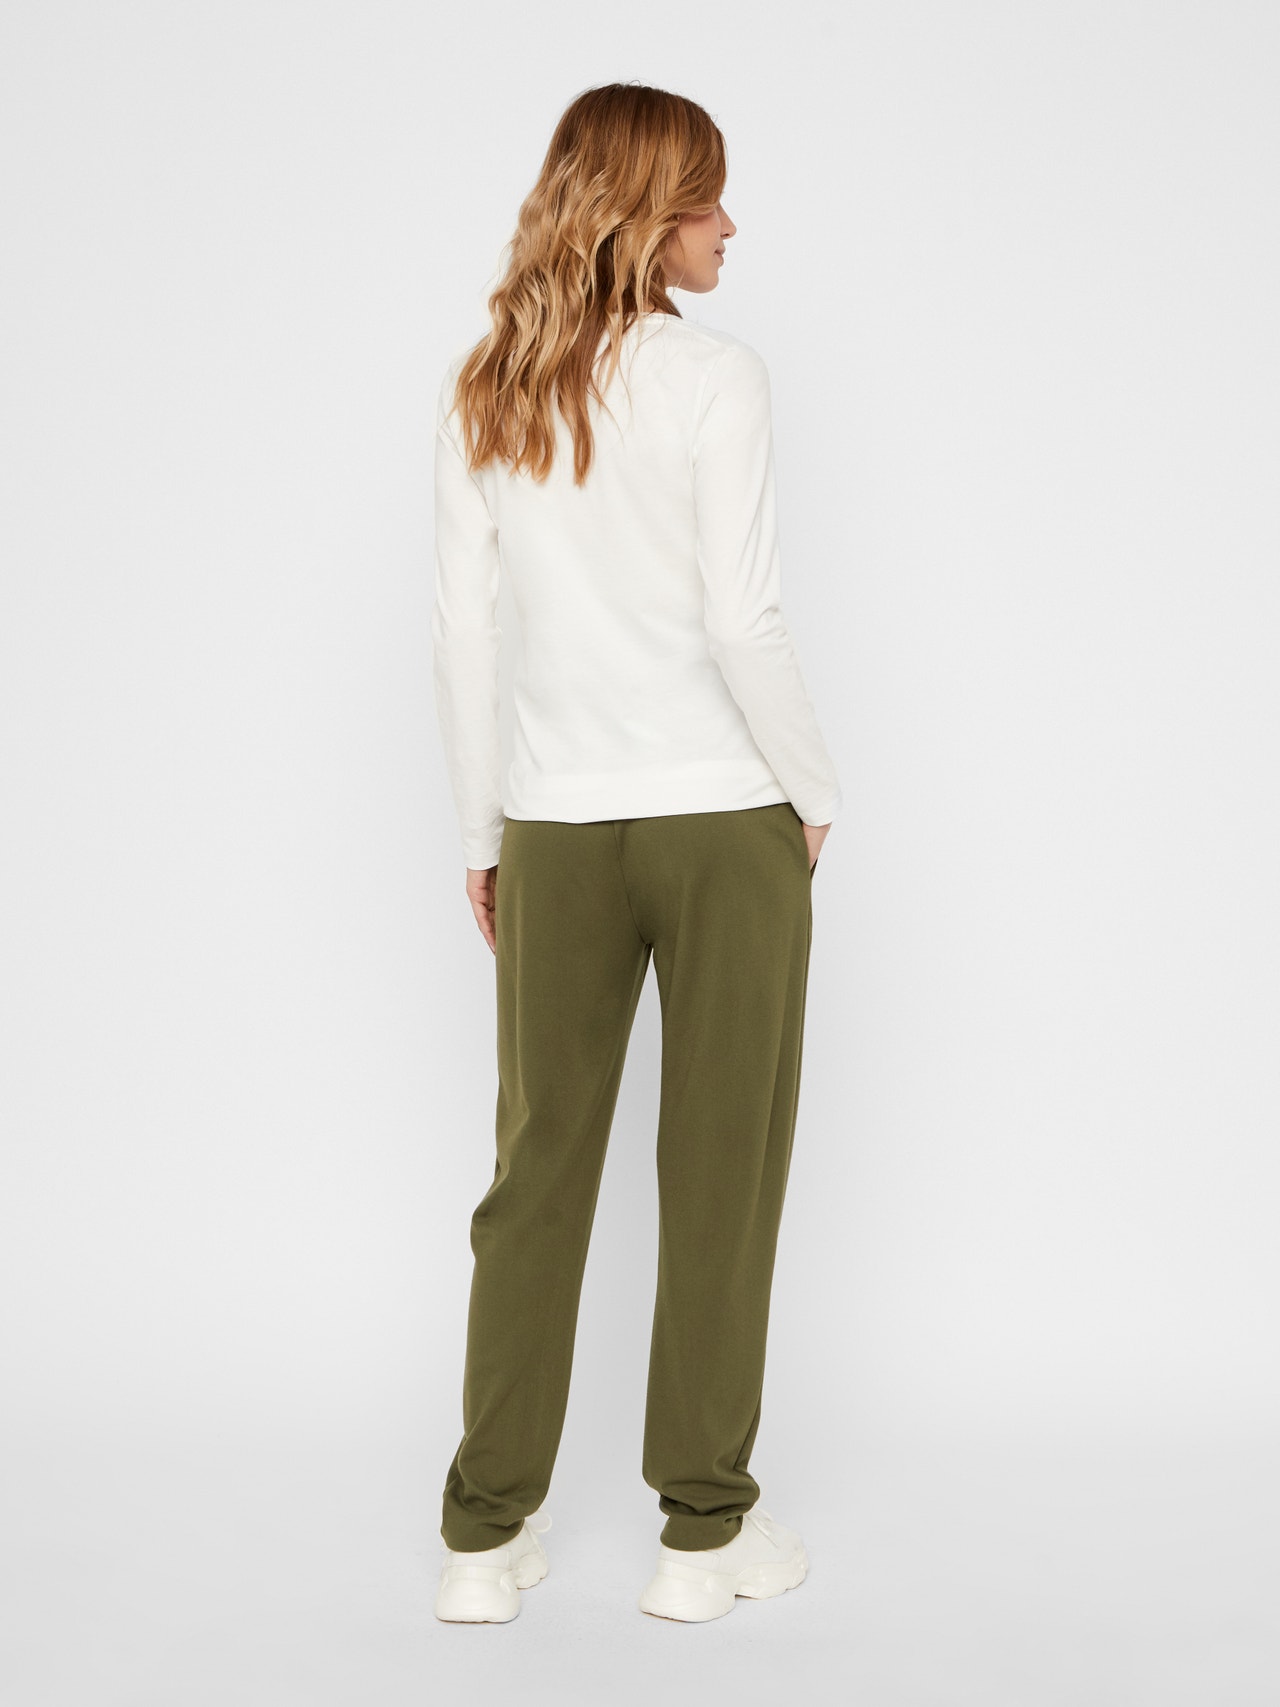 MAMA.LICIOUS Regular Fit Trousers -Dusty Olive - 20011011